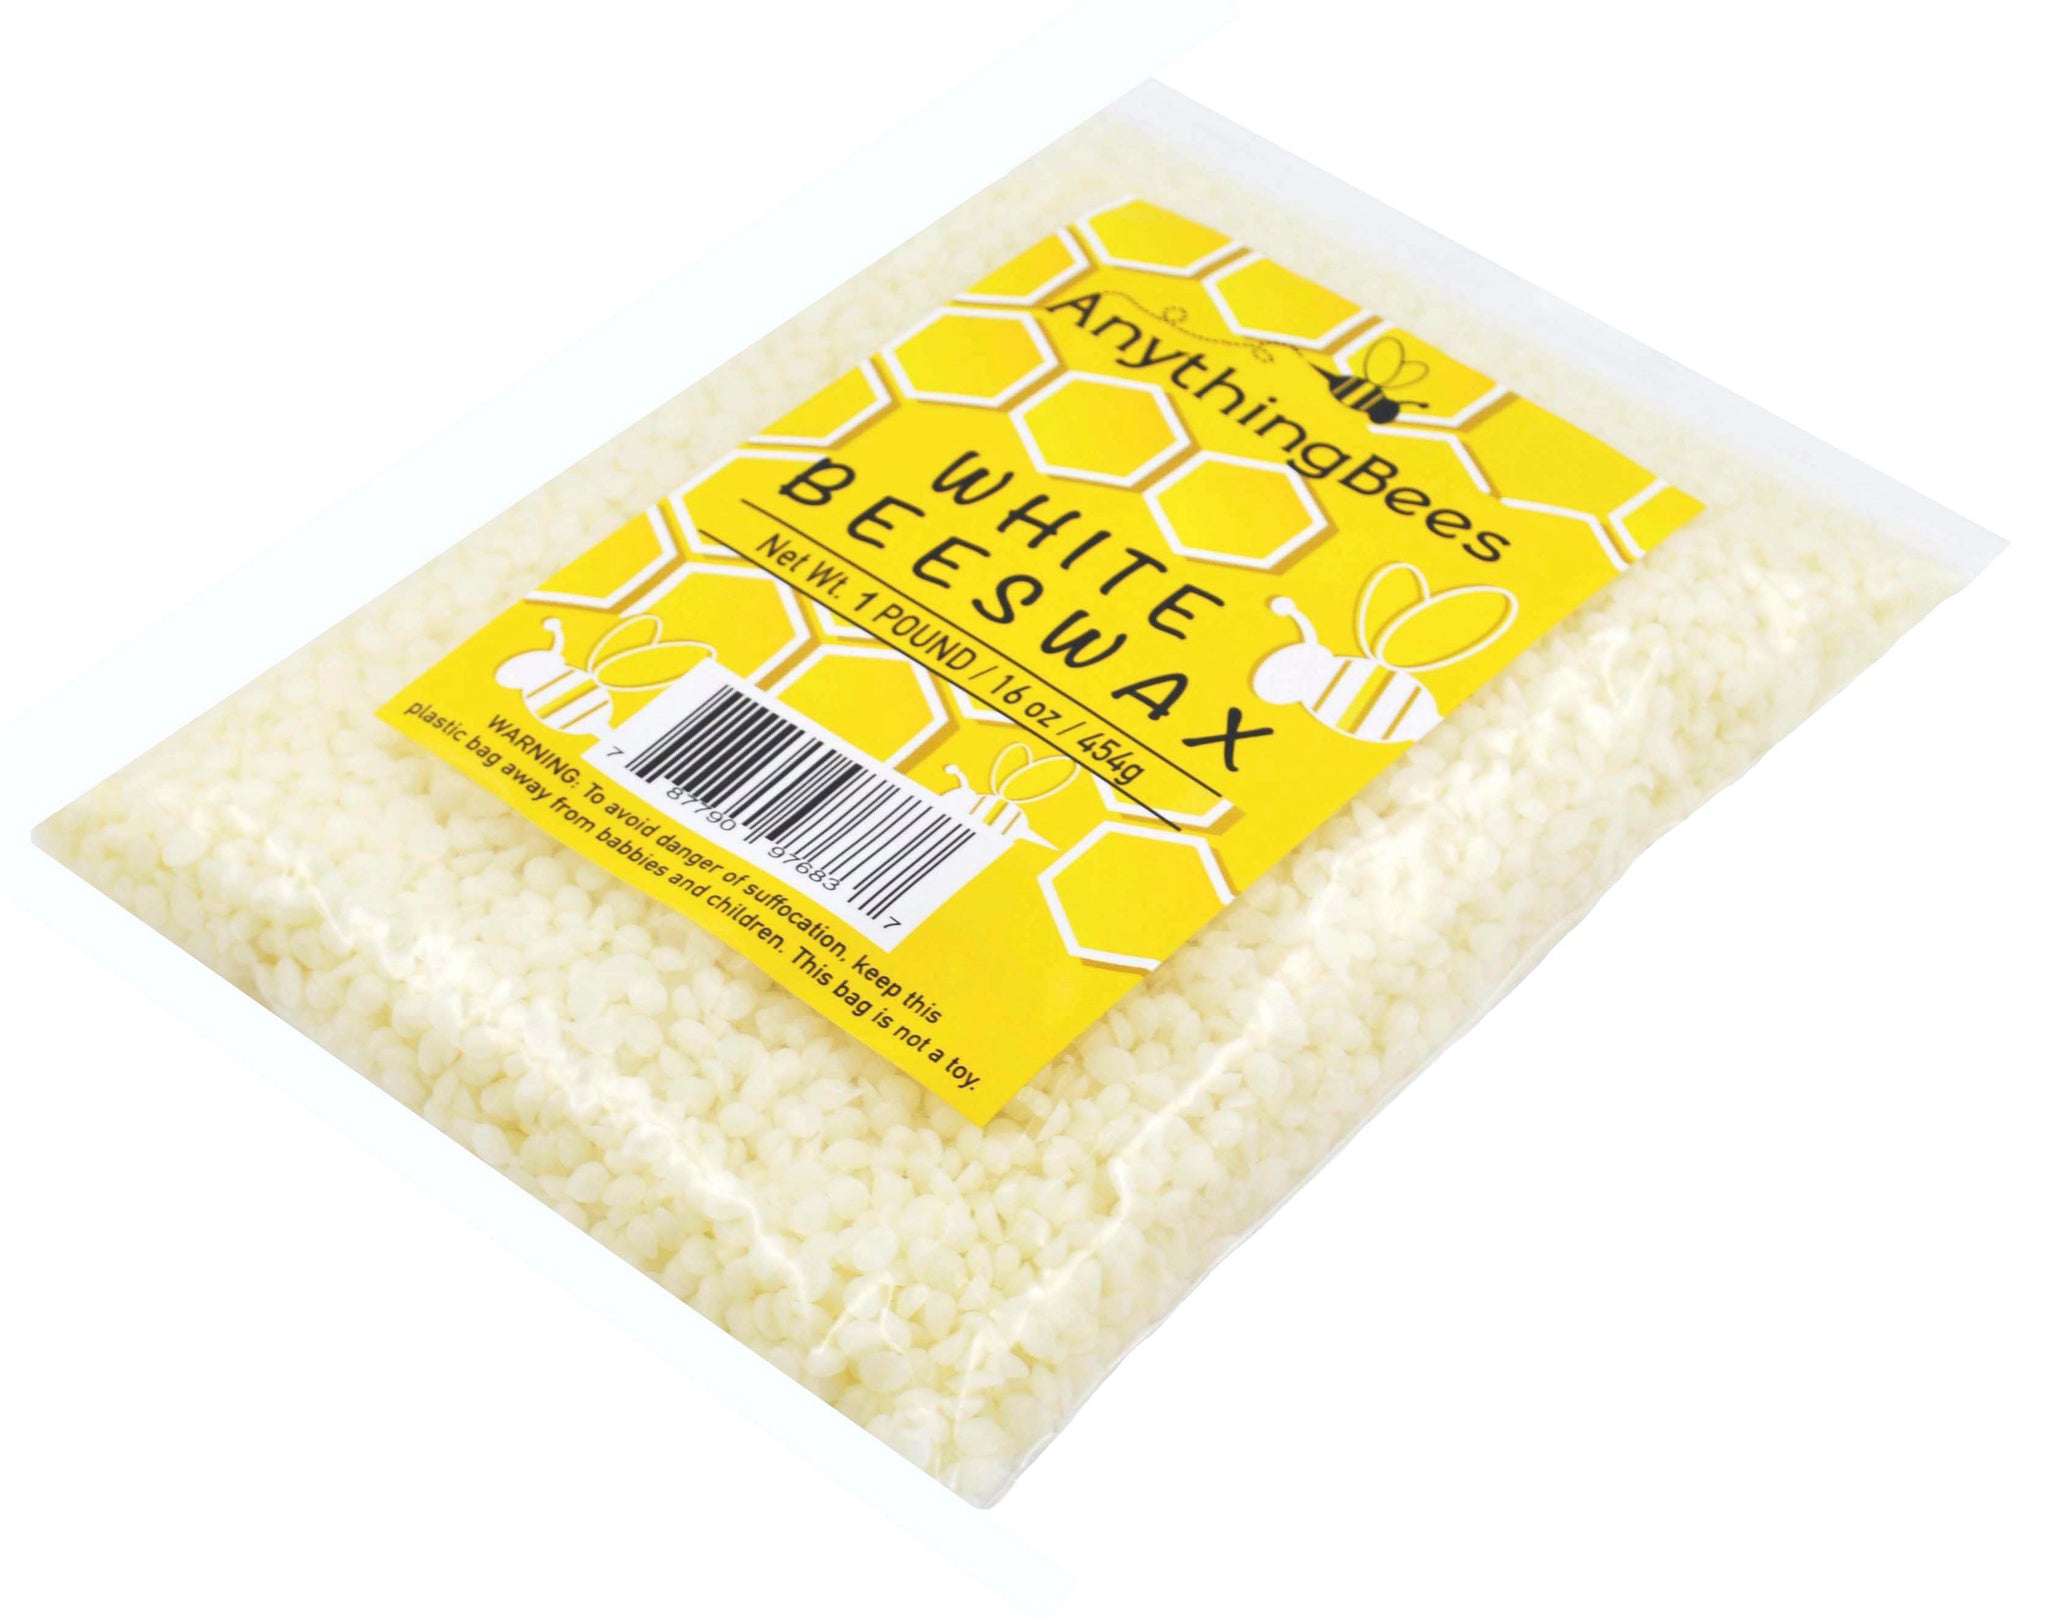 Buy Organic White Beeswax Pellets 1lb Bees Wax Pesticide-free